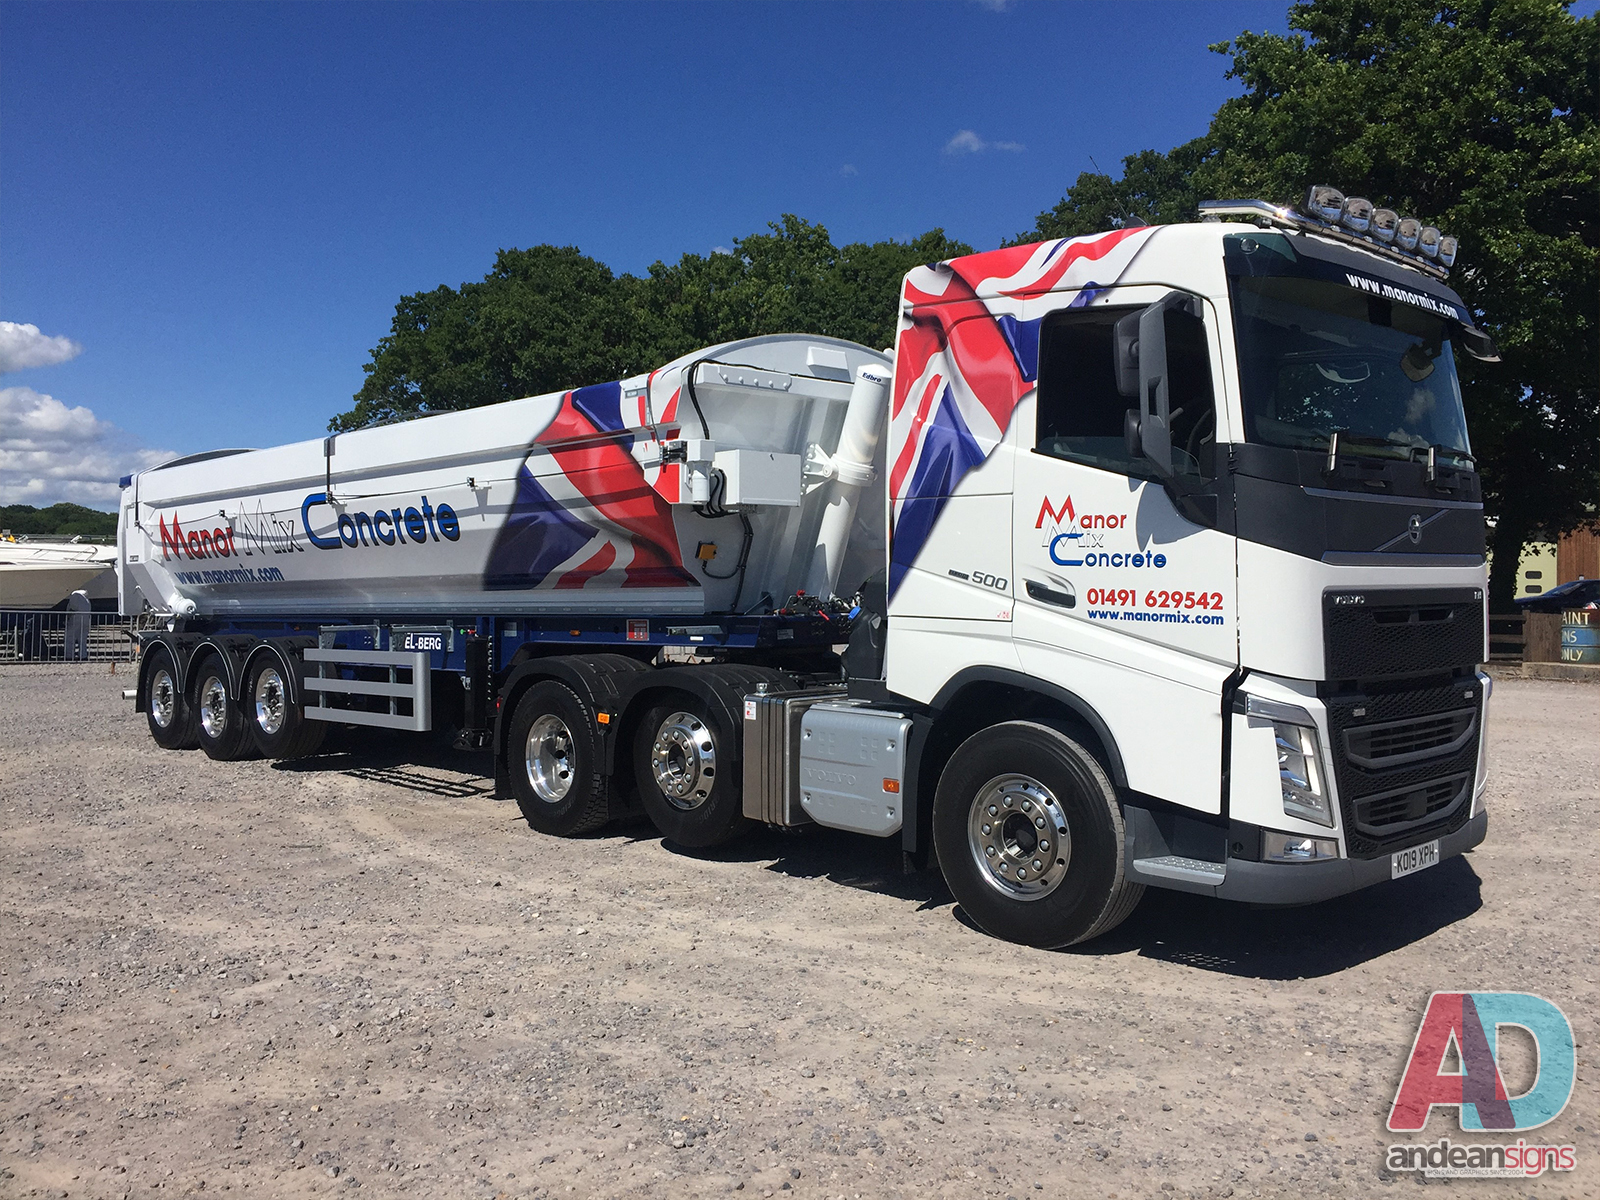 Manor mix concrete digitally printed wrap with vinyl cut graphics